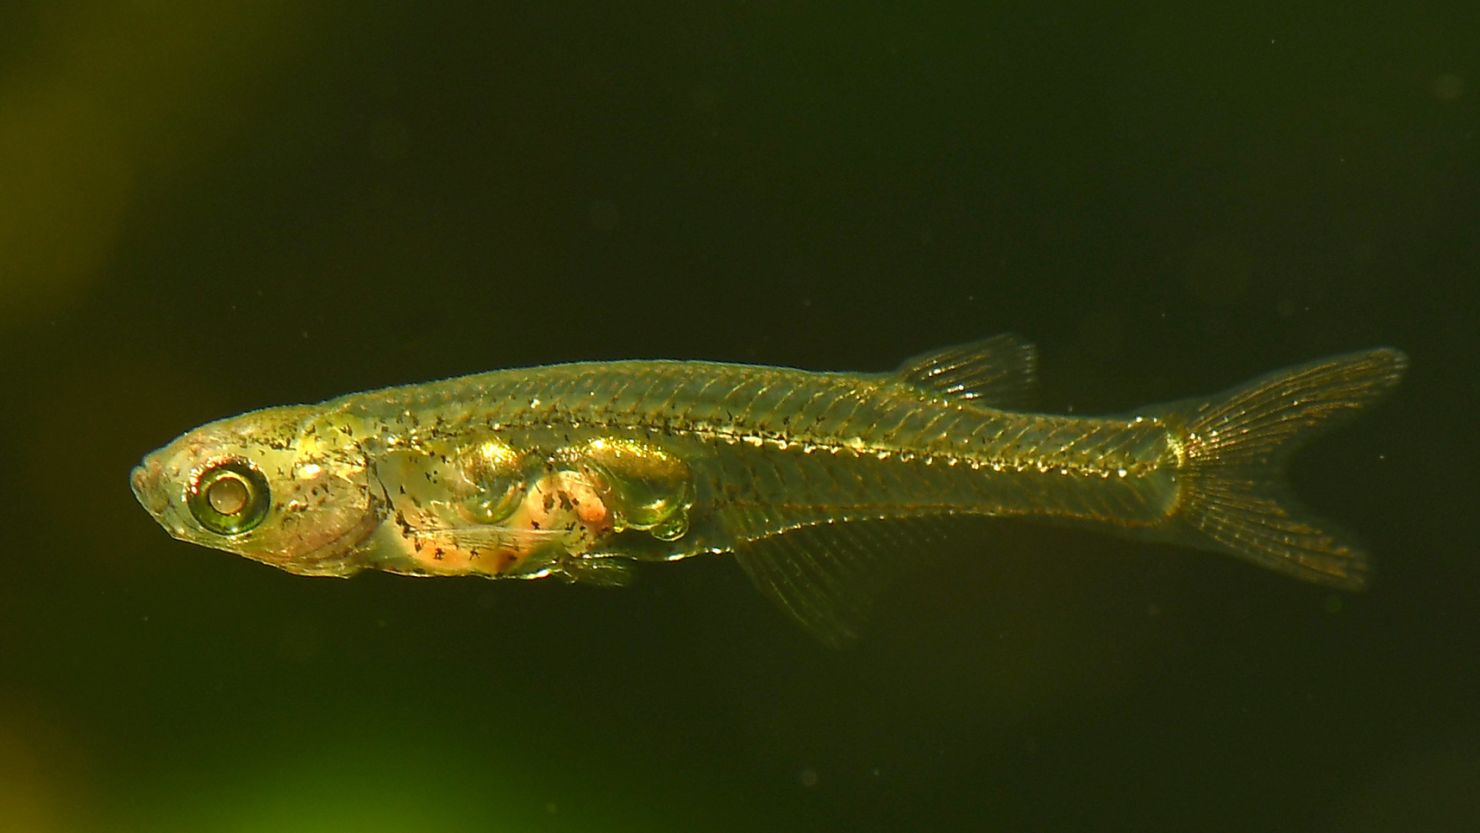 Tiny fish can make noises louder than an elephant, says new study